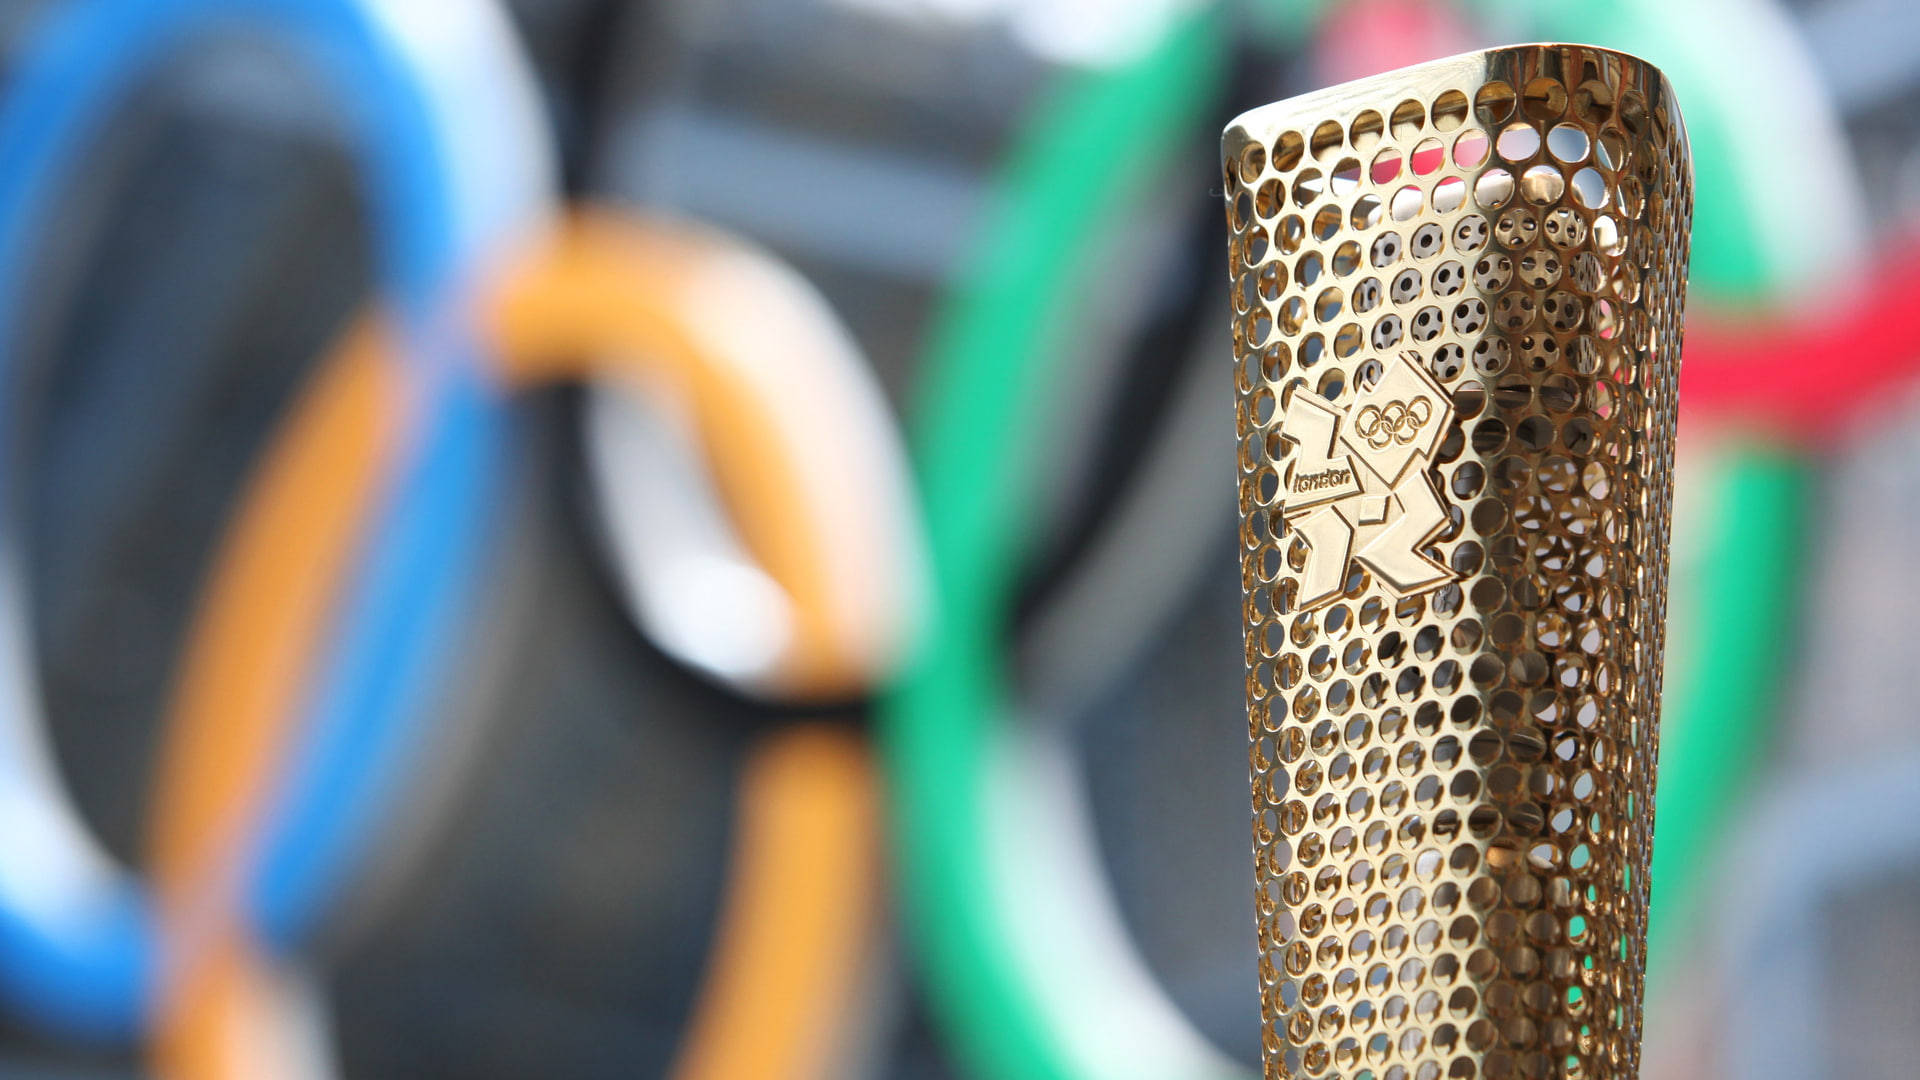 Brightly Blazing: A Close Up Look At The 2020 Tokyo Olympics Torch Background